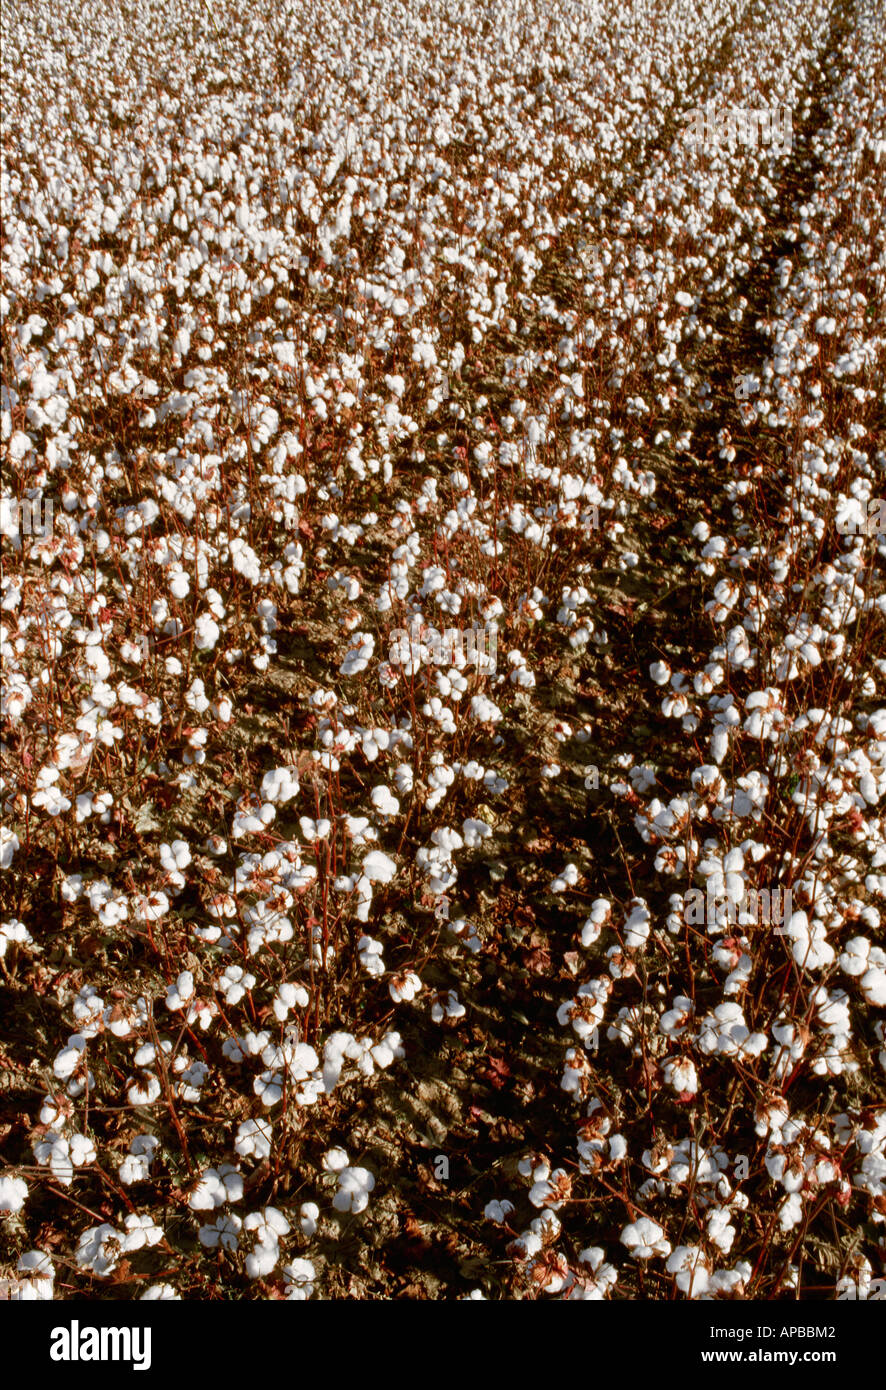 Agriculture - Rows of harvest stage cotton in late afternoon light / Mississippi, USA. Stock Photo